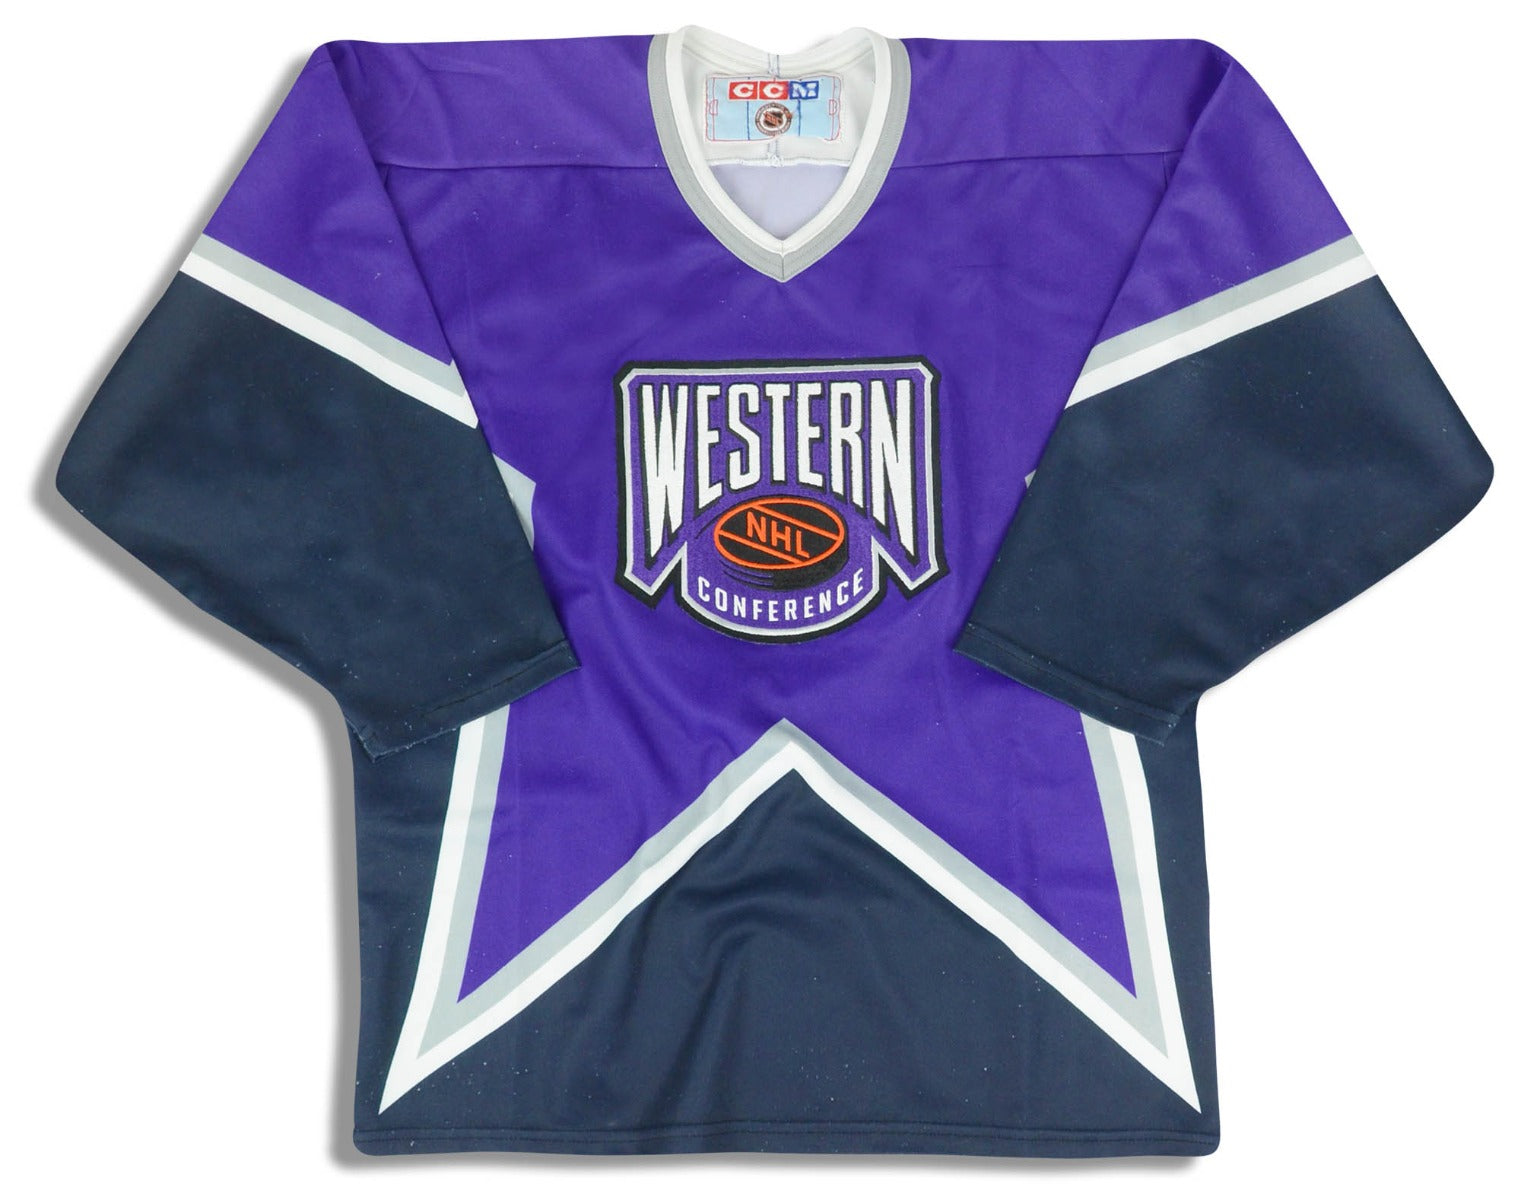 The jerseys from the 1996 NHL All-Star Game are all-time 🔥